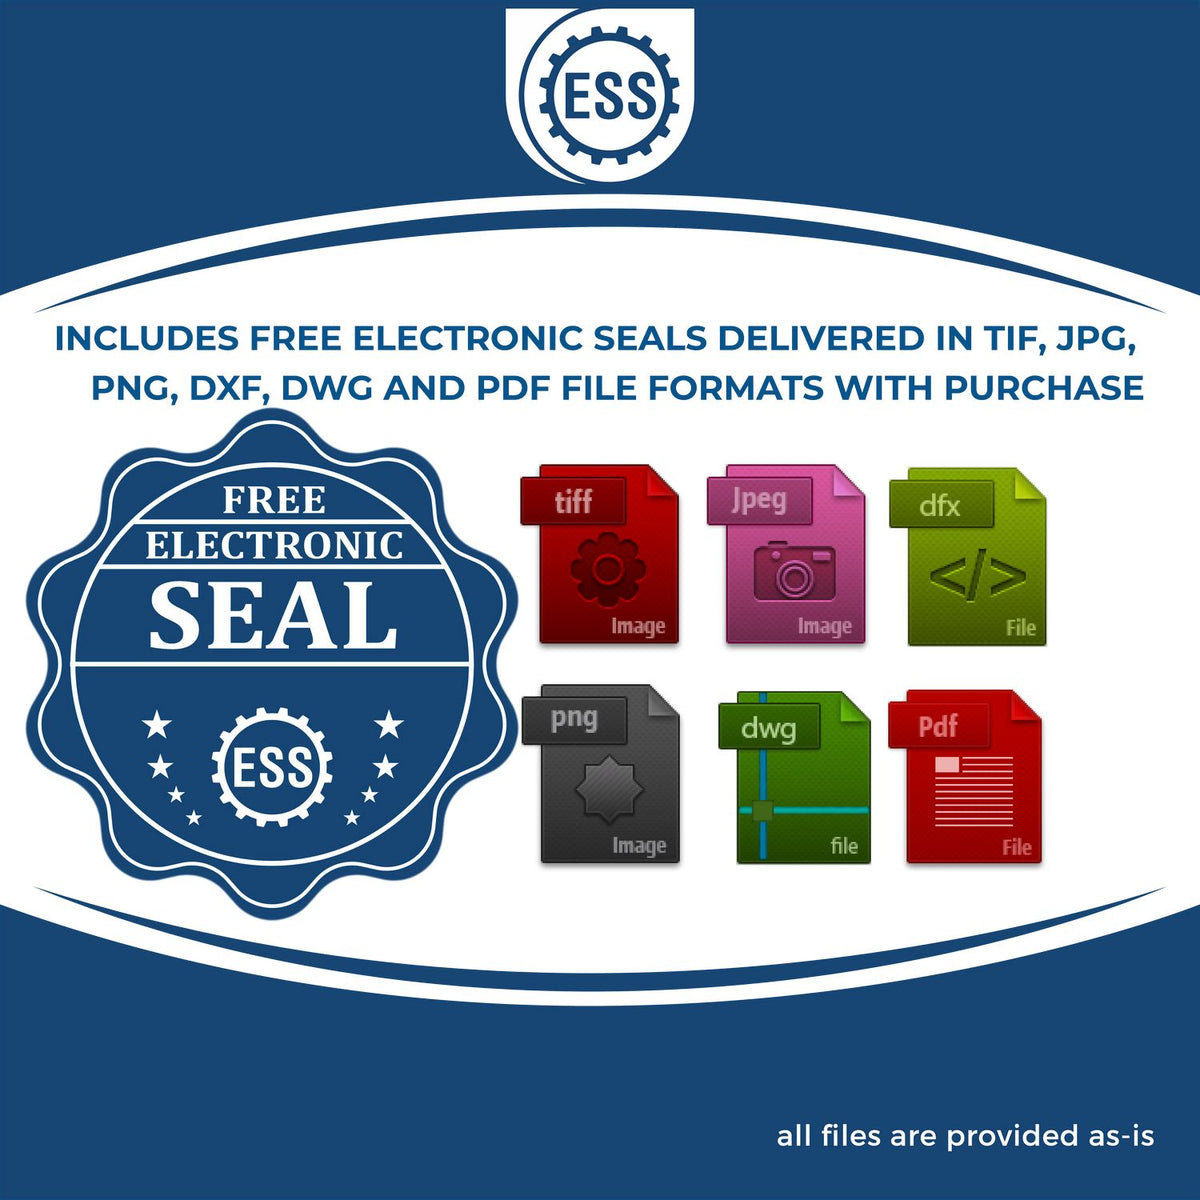 An infographic for the free electronic seal for the PSI New York Notary Stamp illustrating the different file type icons such as DXF, DWG, TIF, JPG and PNG.